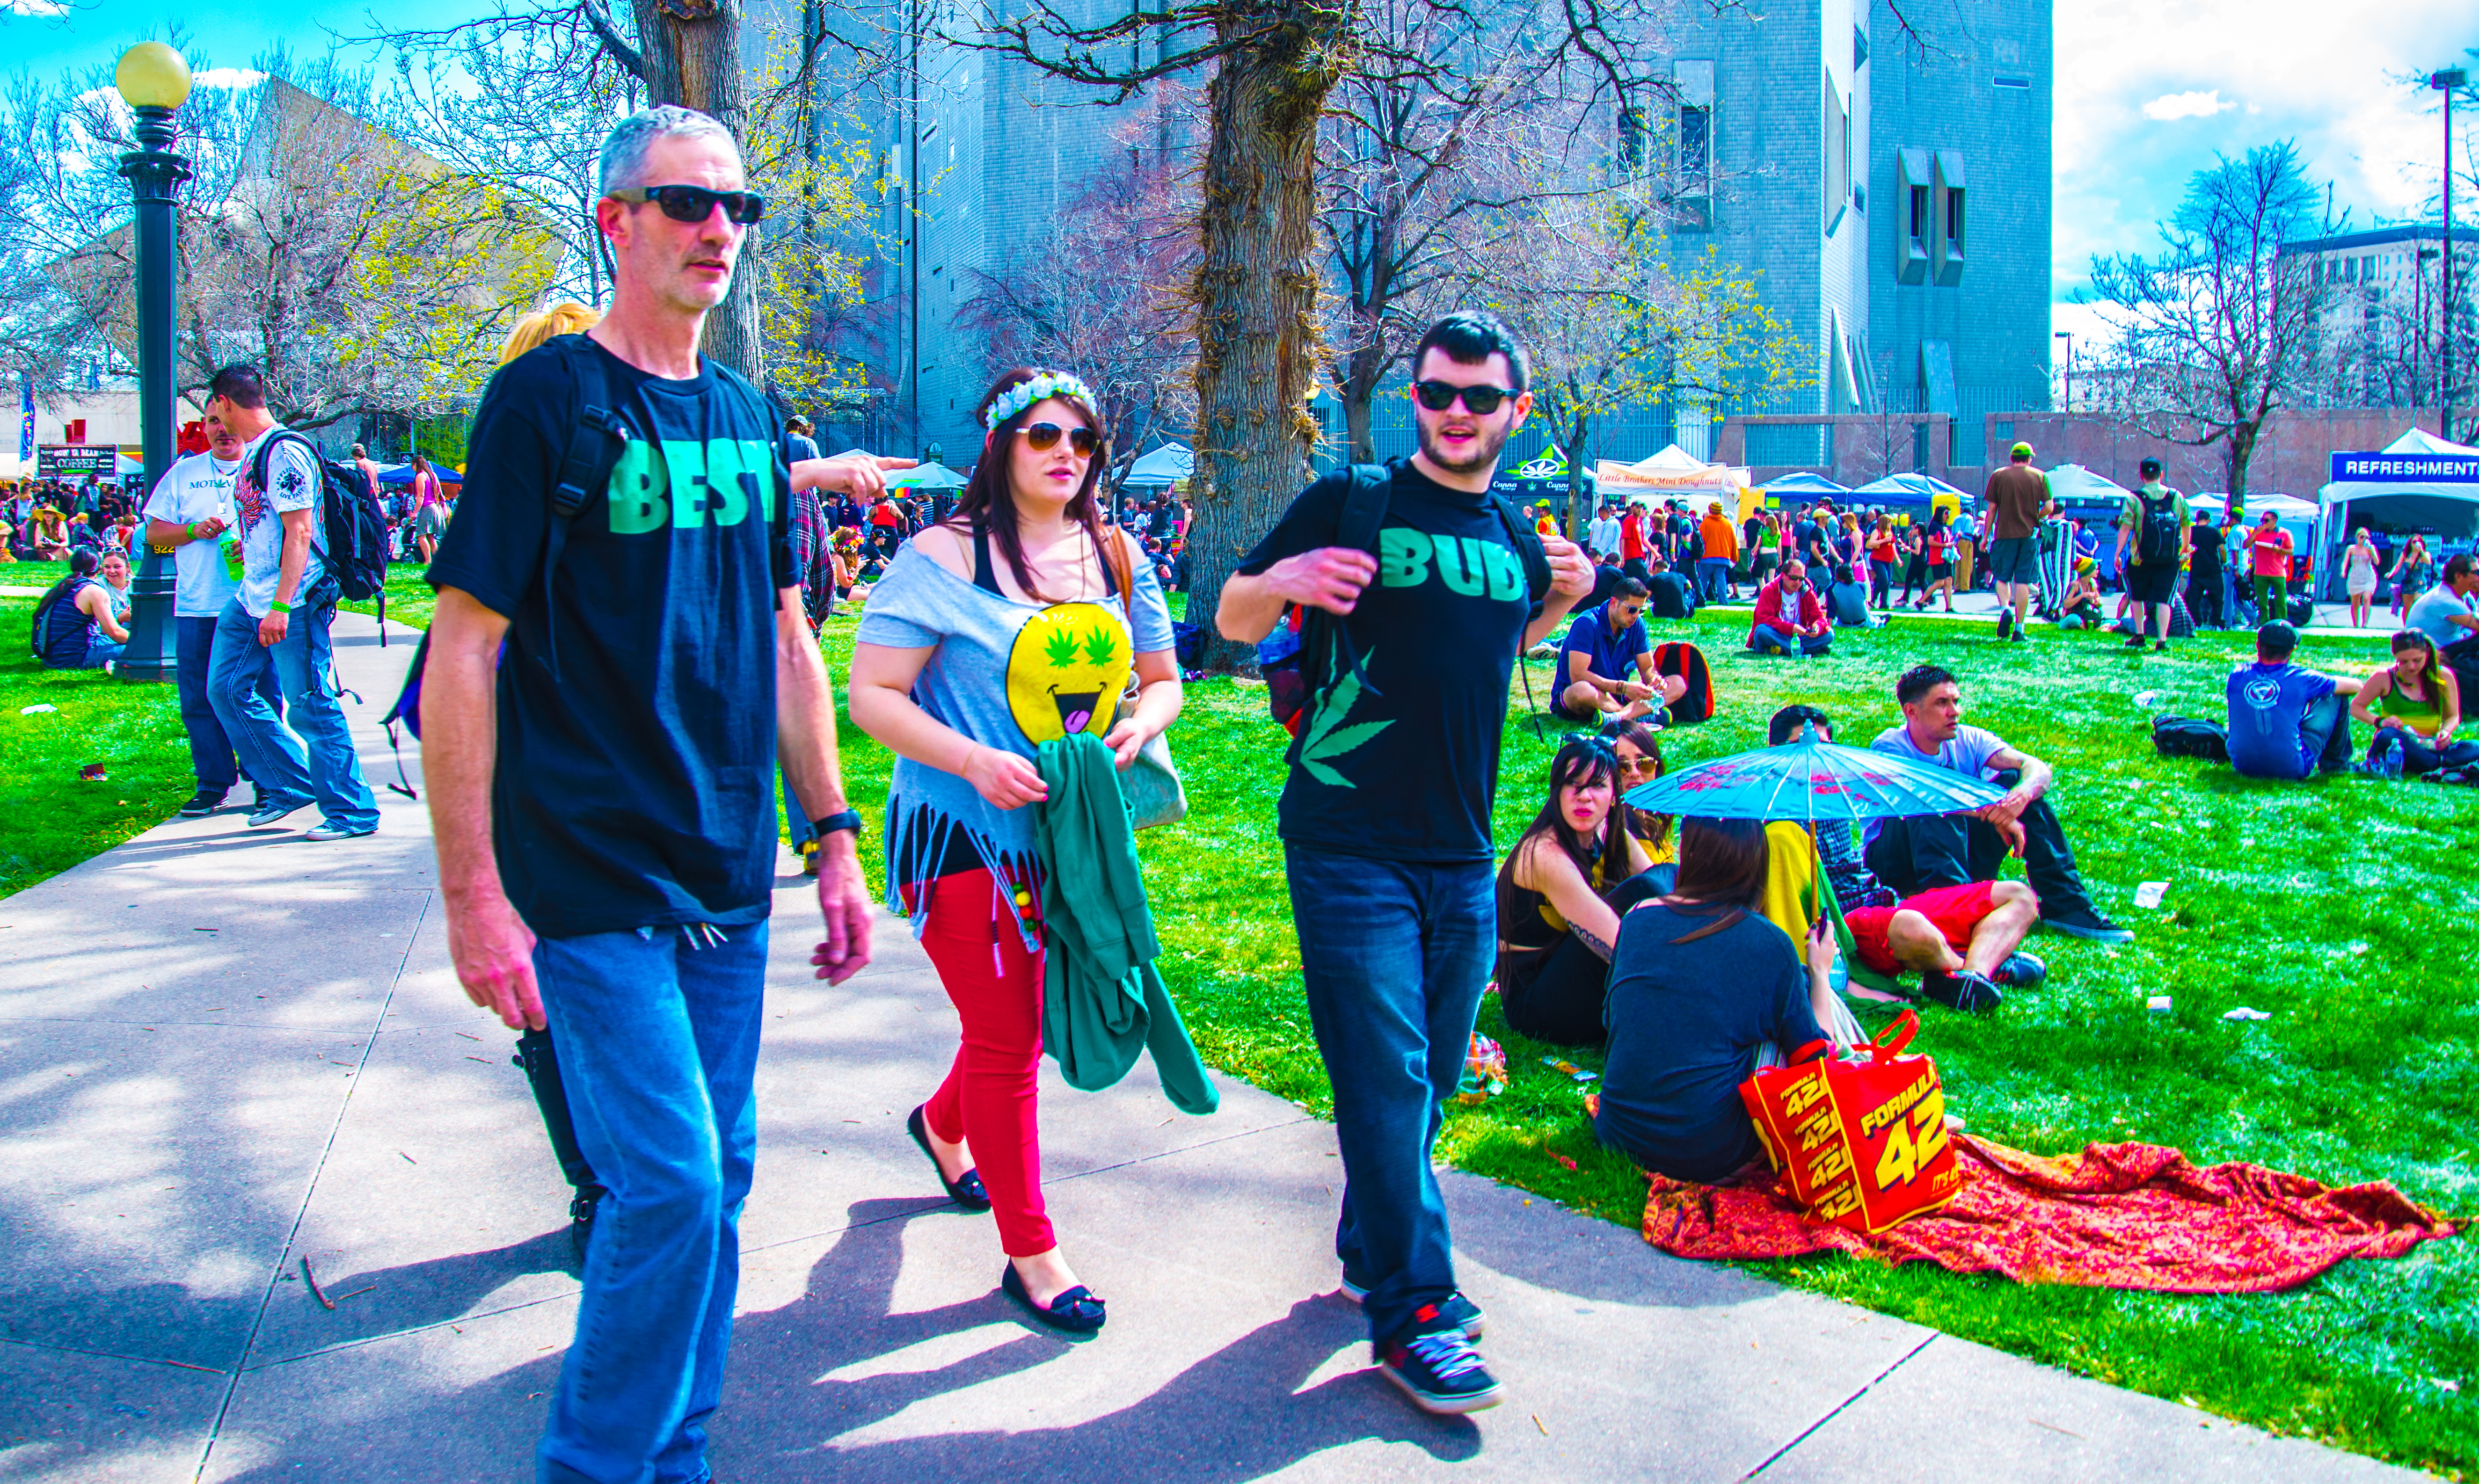 420 Rally, Denver Civic Center Park 2014 Crowd Capitol Weed Smoke Cloud Capitol Best Bud T-Shirts Image ©Fara Paige